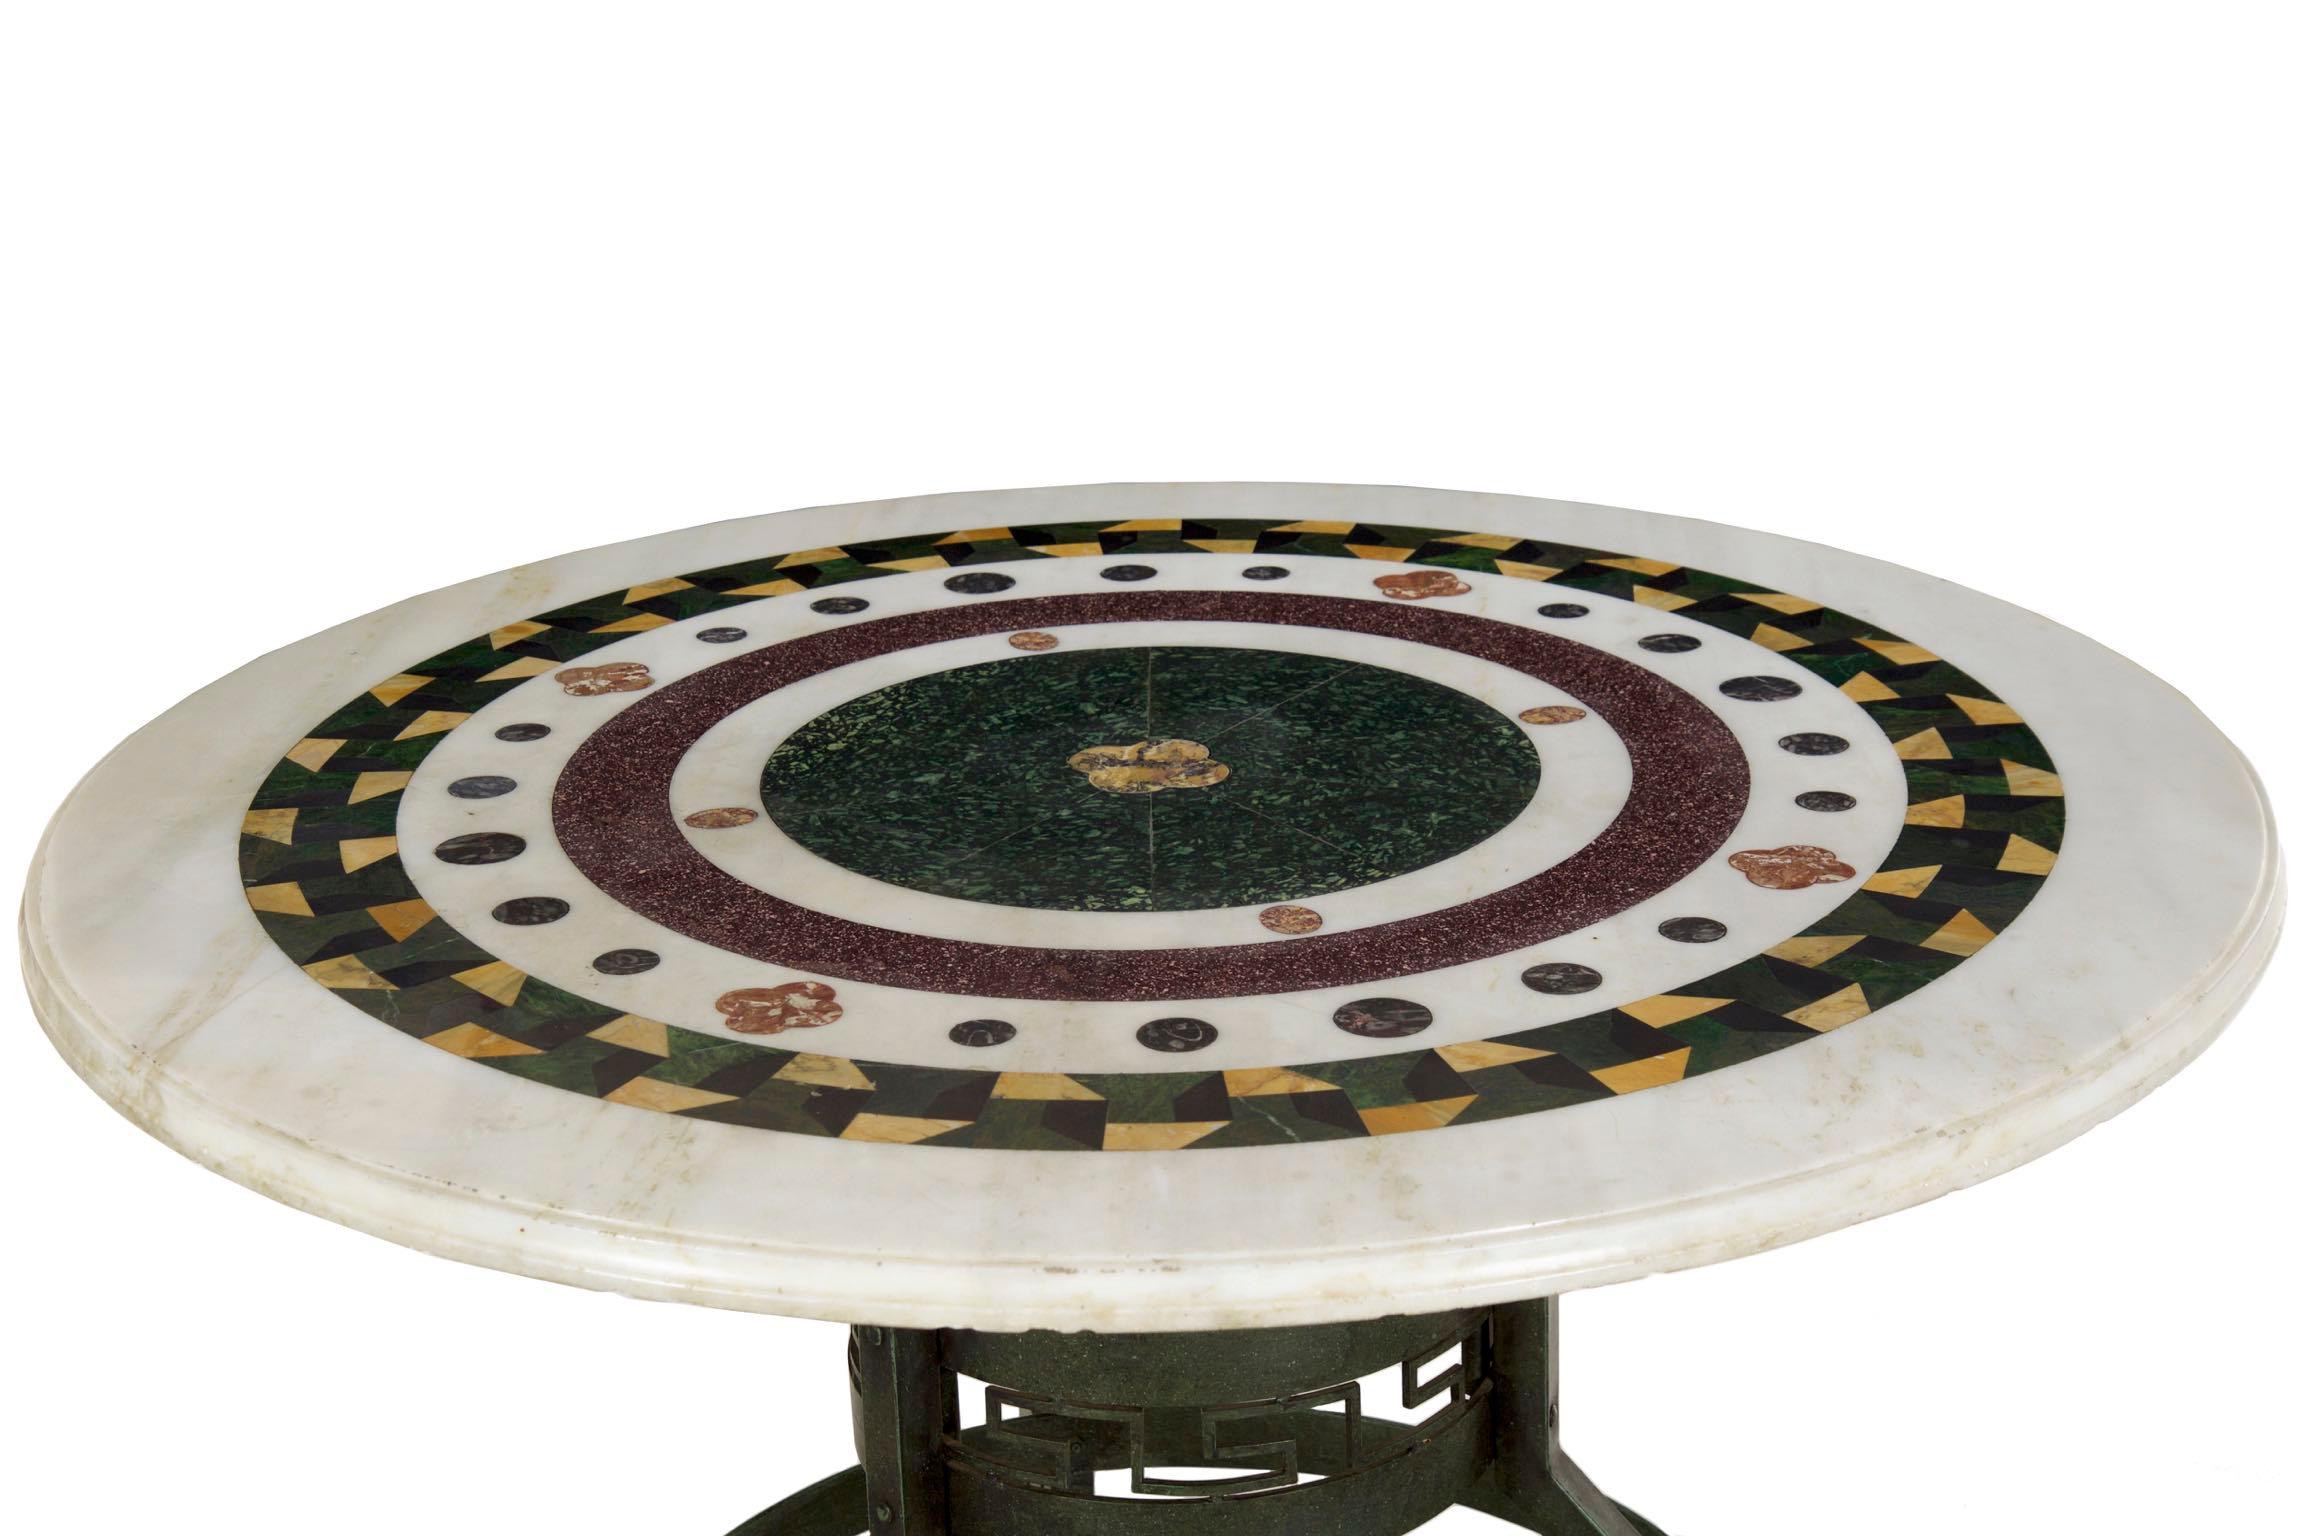 An exceptional center table with a striking blend of the modern and historical, the angular Greek-key form bronze base was likely crafted during the first half of the 20th century and is finished in an attractive green Verdigris patina. It supports